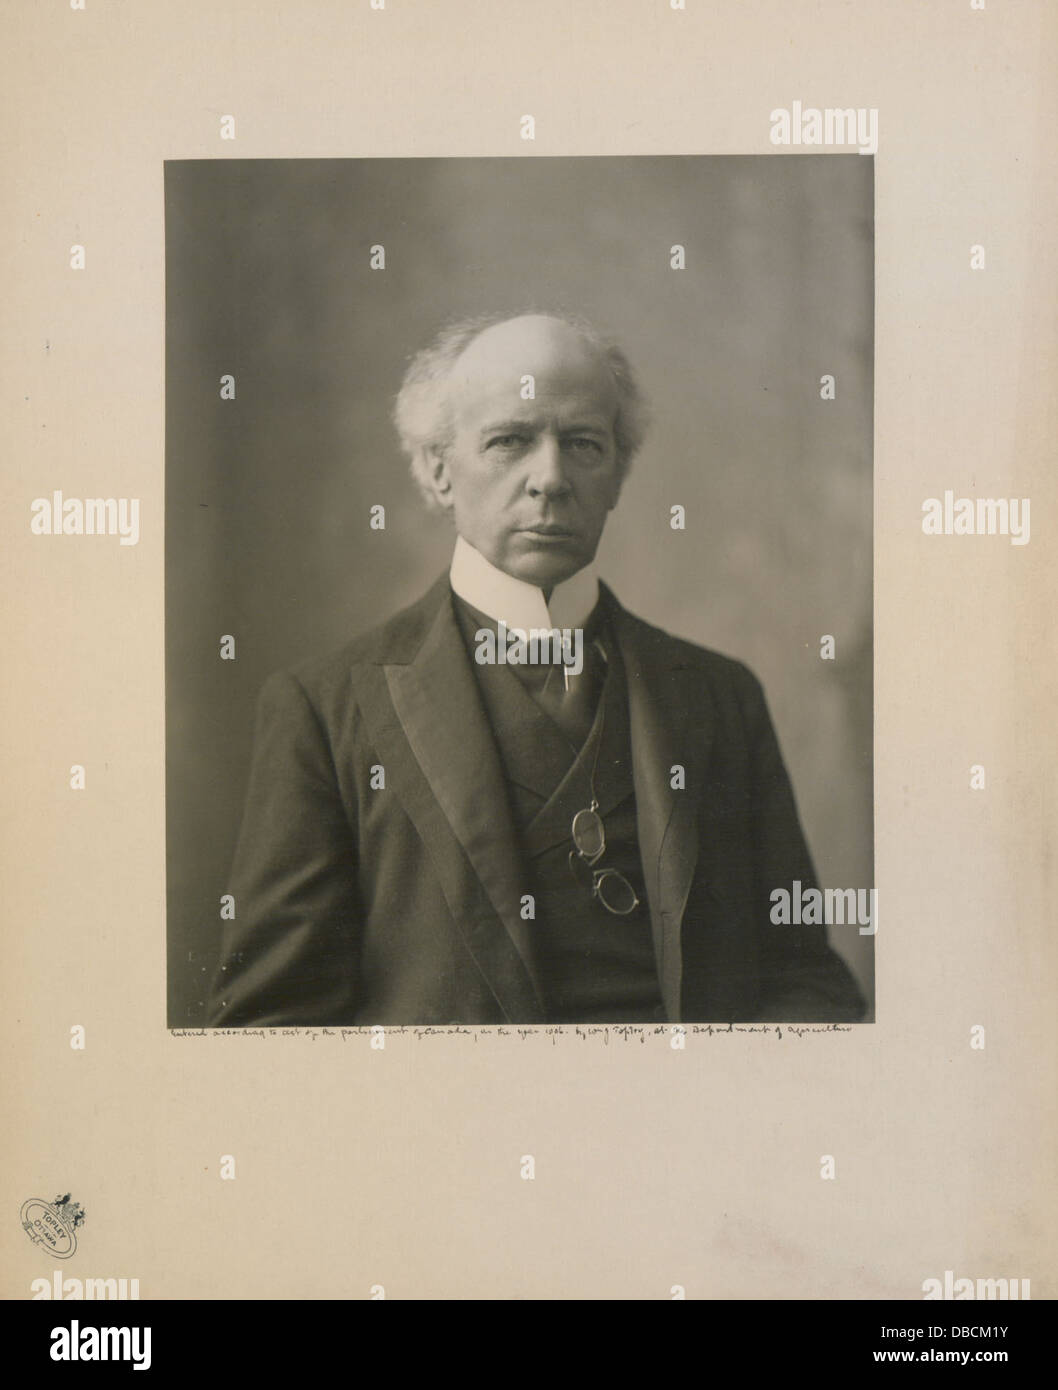 The Honourable Sir Wilfrid Laurier Photo C (HS85-10-16873) Stock Photo